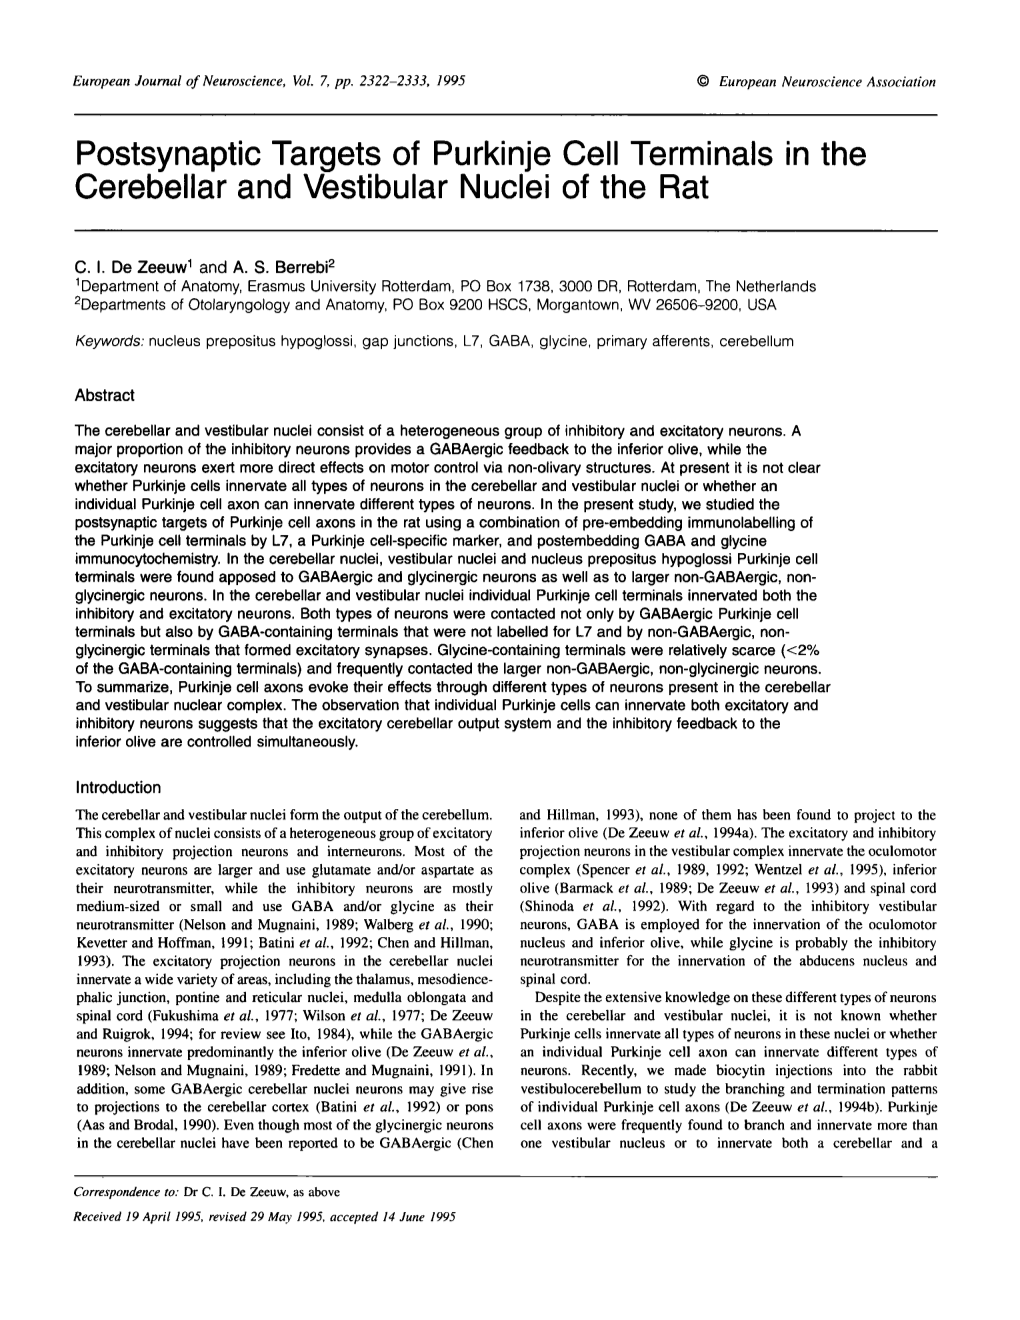 Postsynaptic Targets of Purkinje Cell Terminals in the Cerebellar and Vestibular Nuclei of the Rat